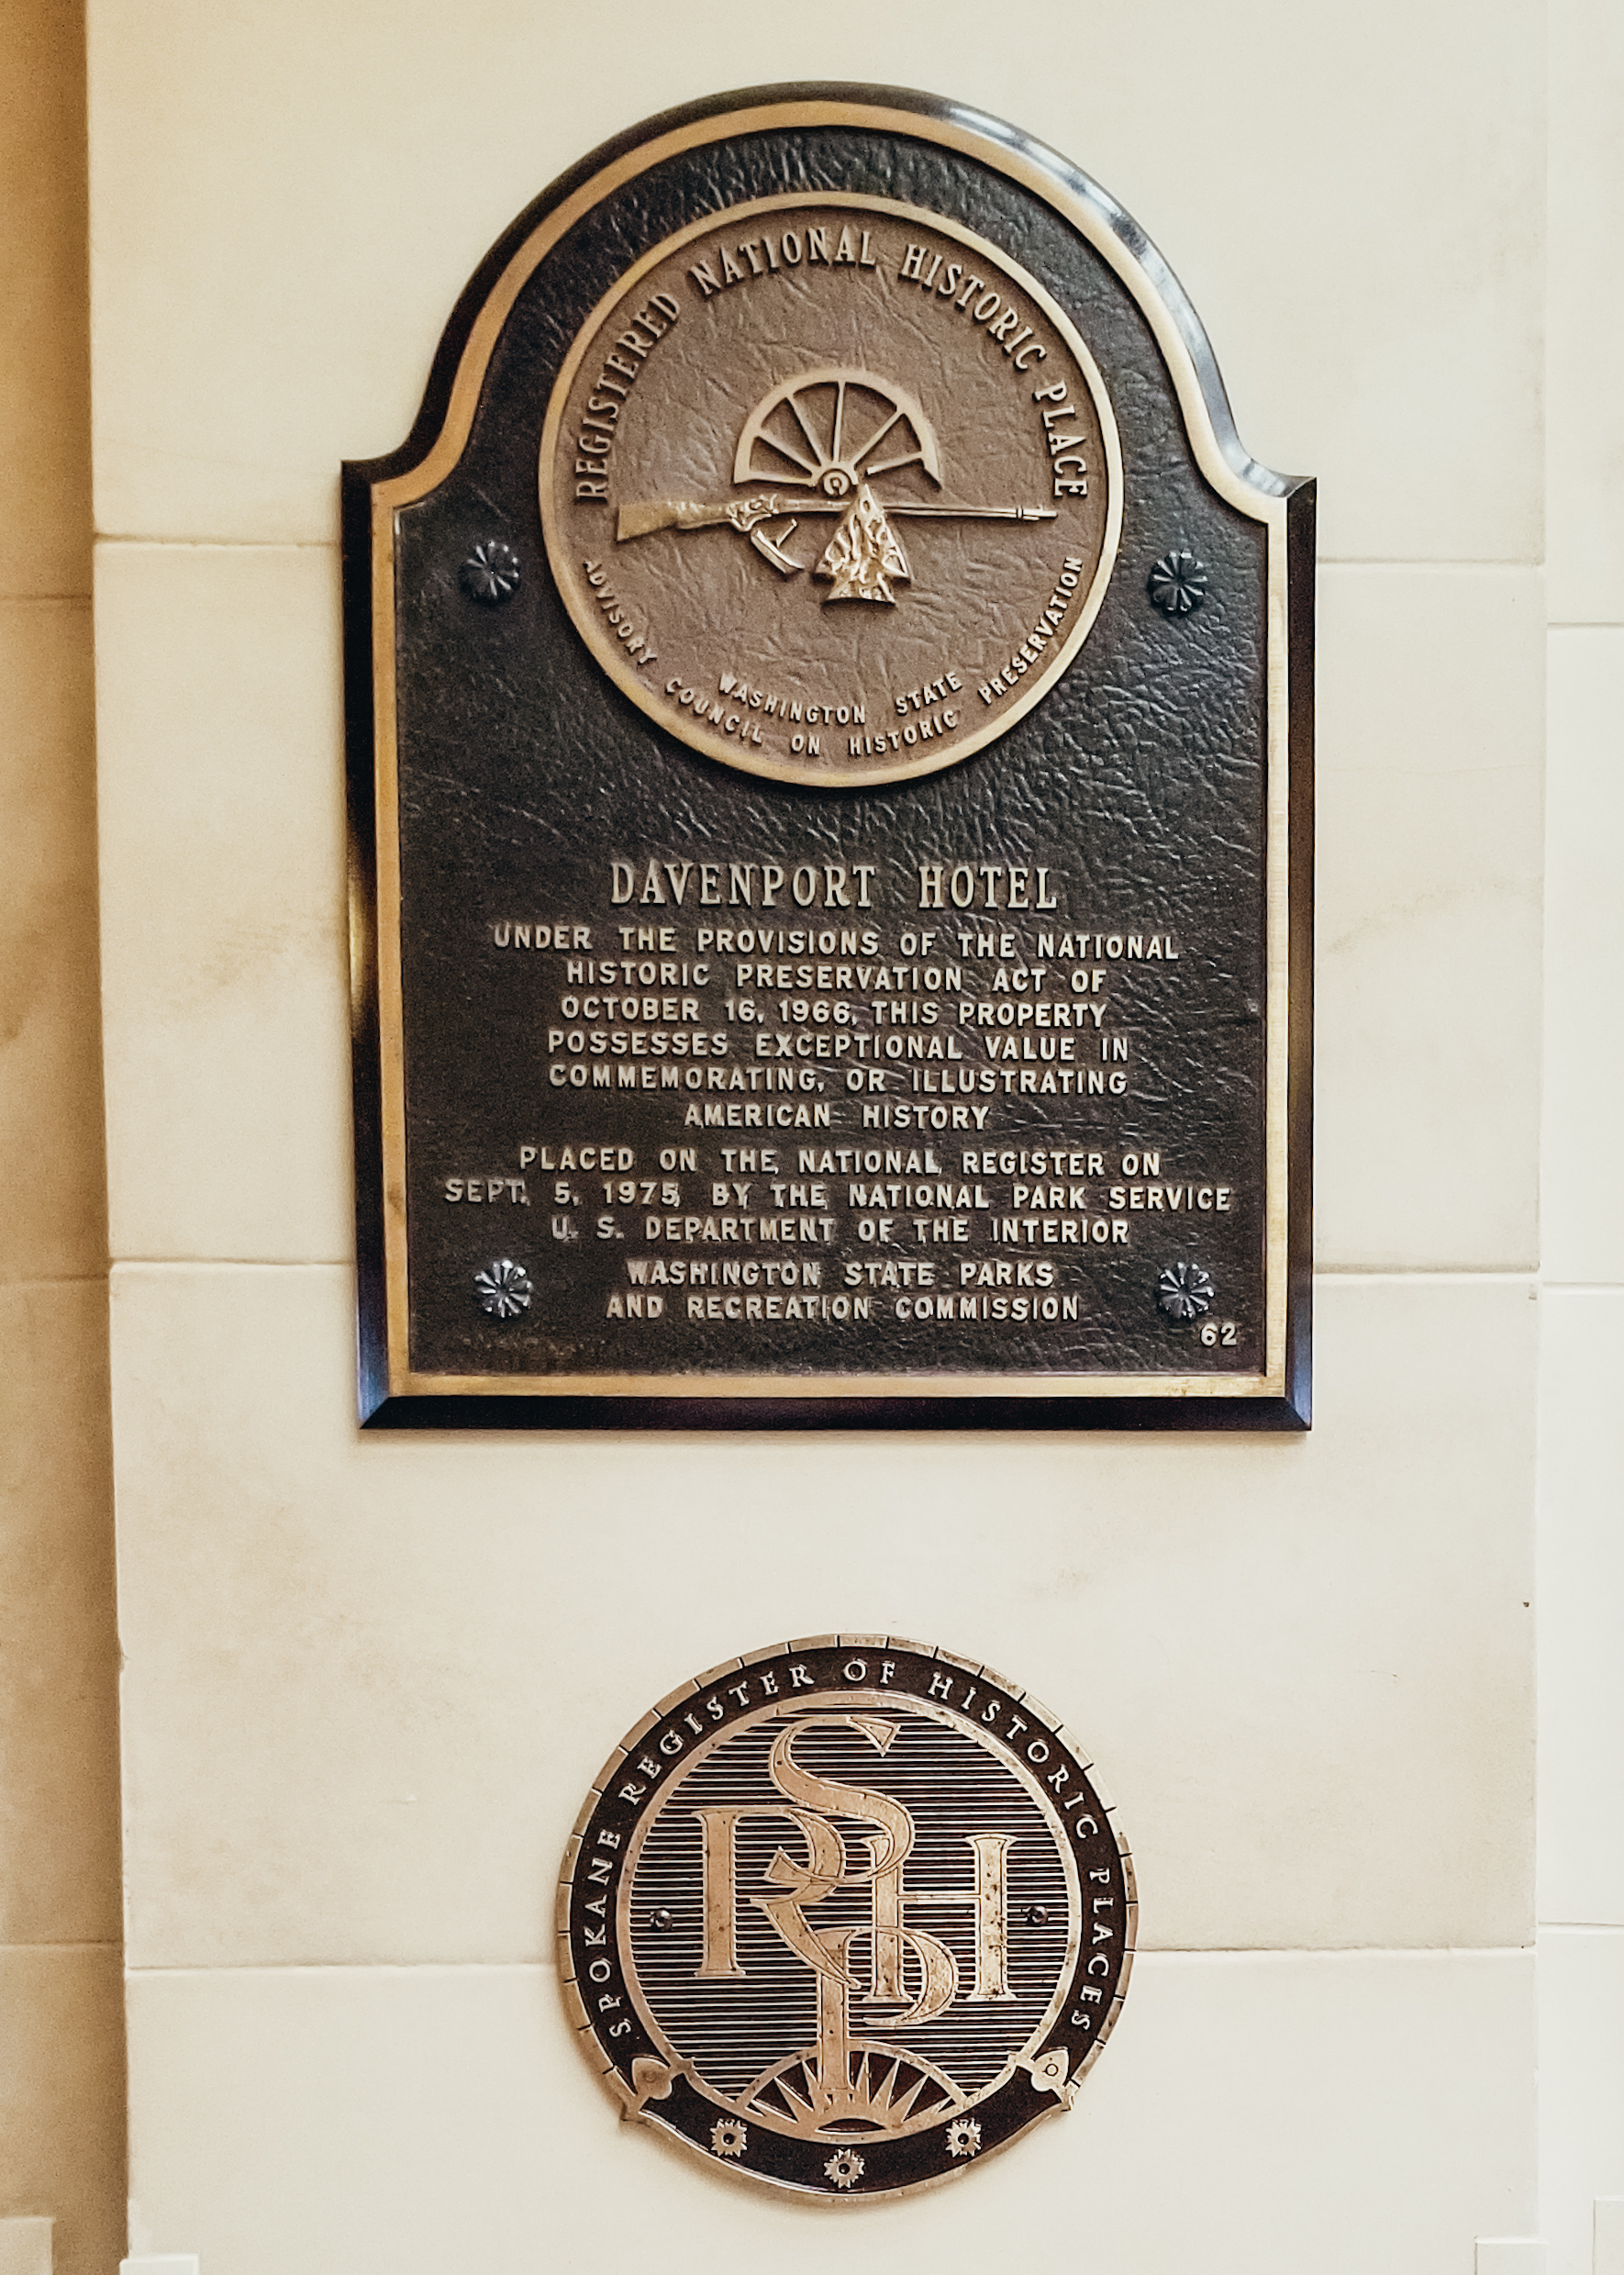 The Historic Davenport Hotel is a National Historic Site!